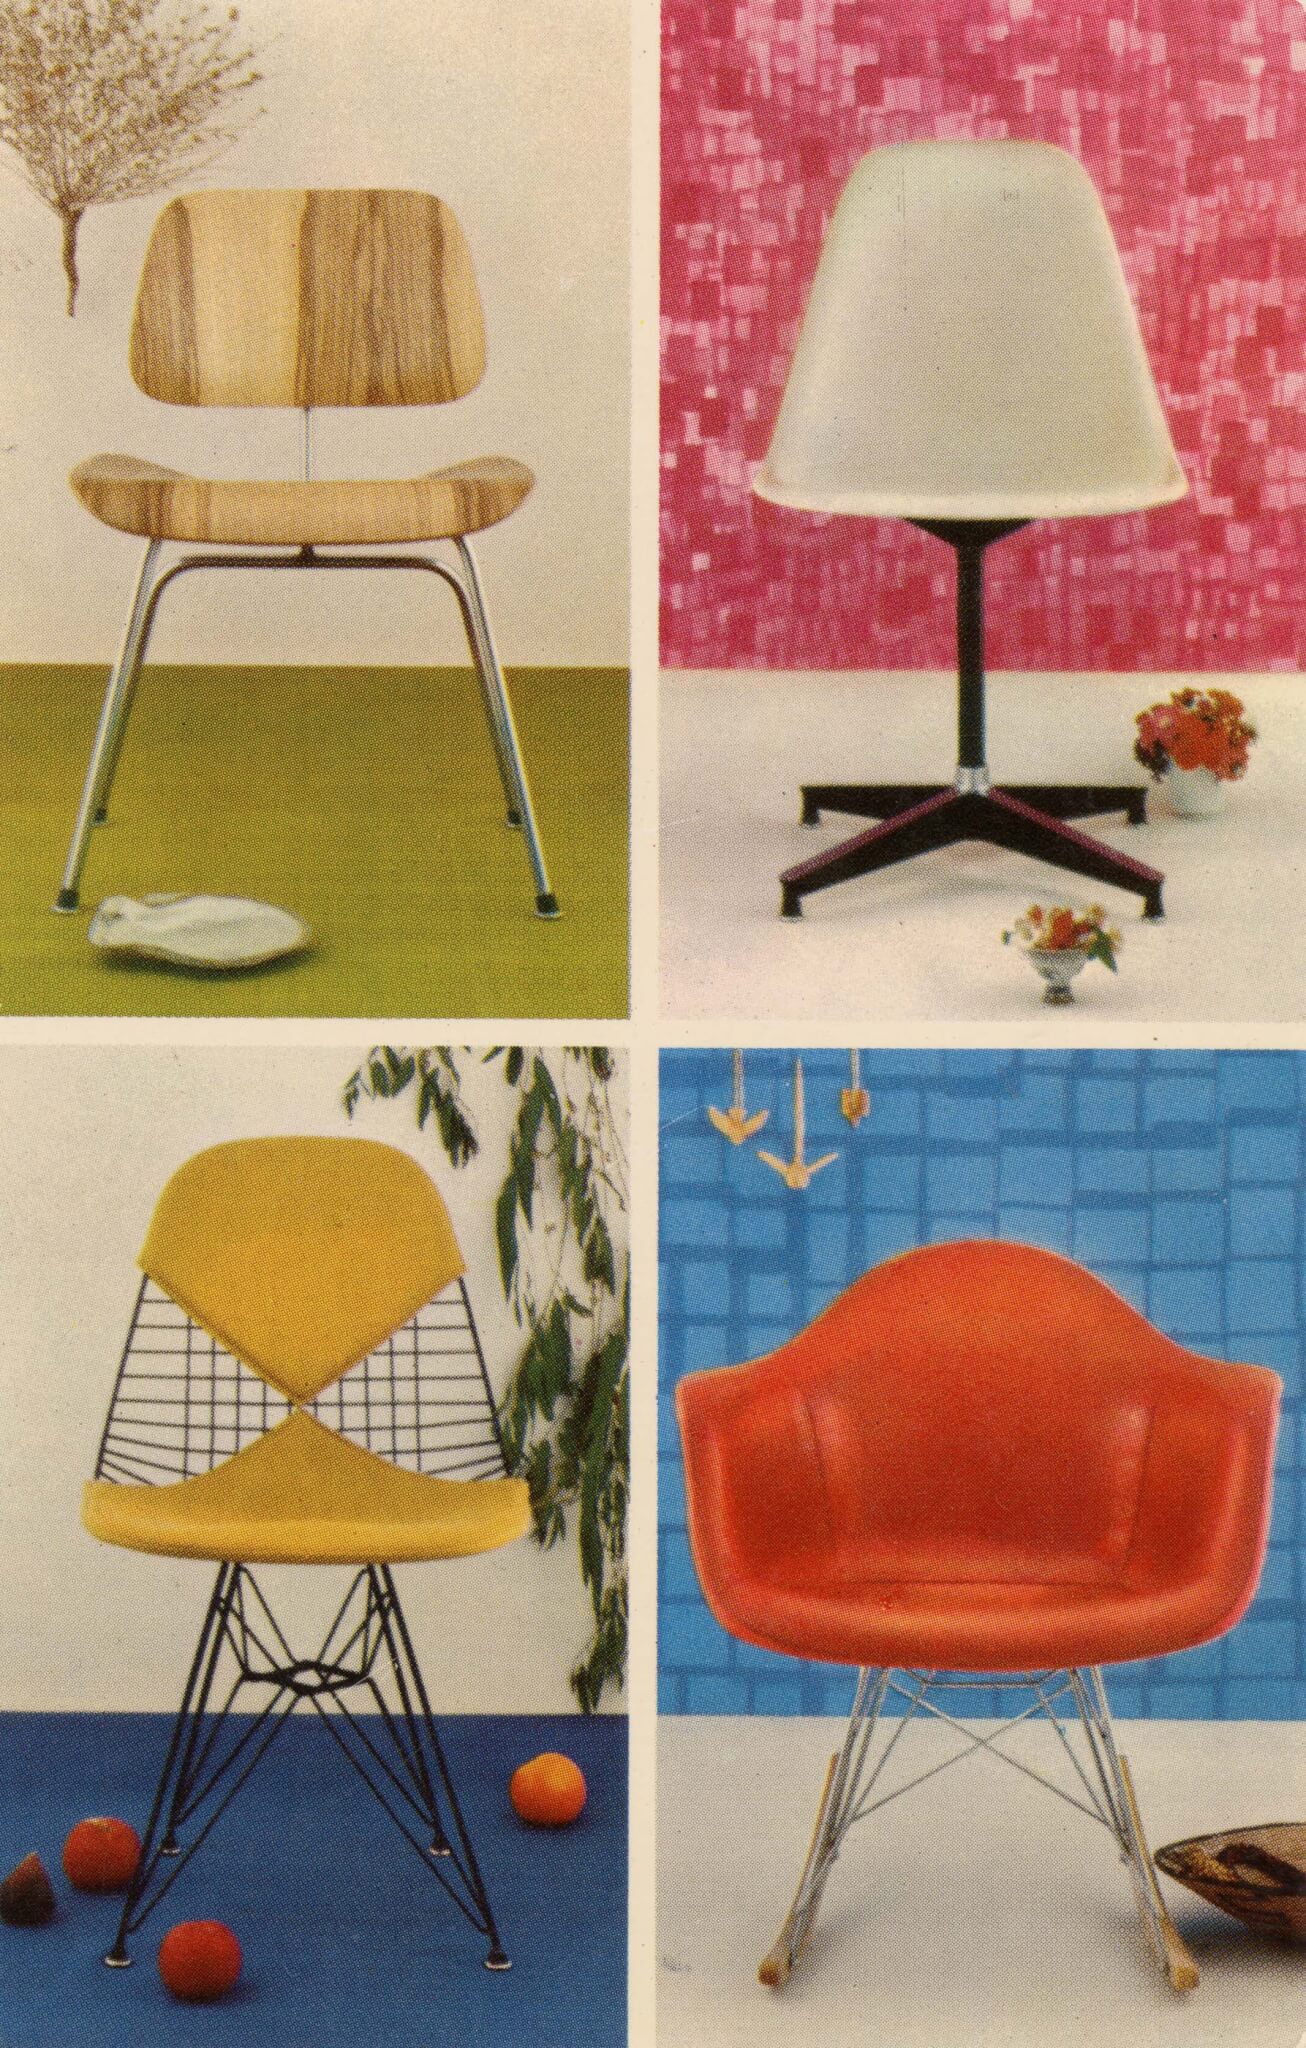 postcard with four chair designs